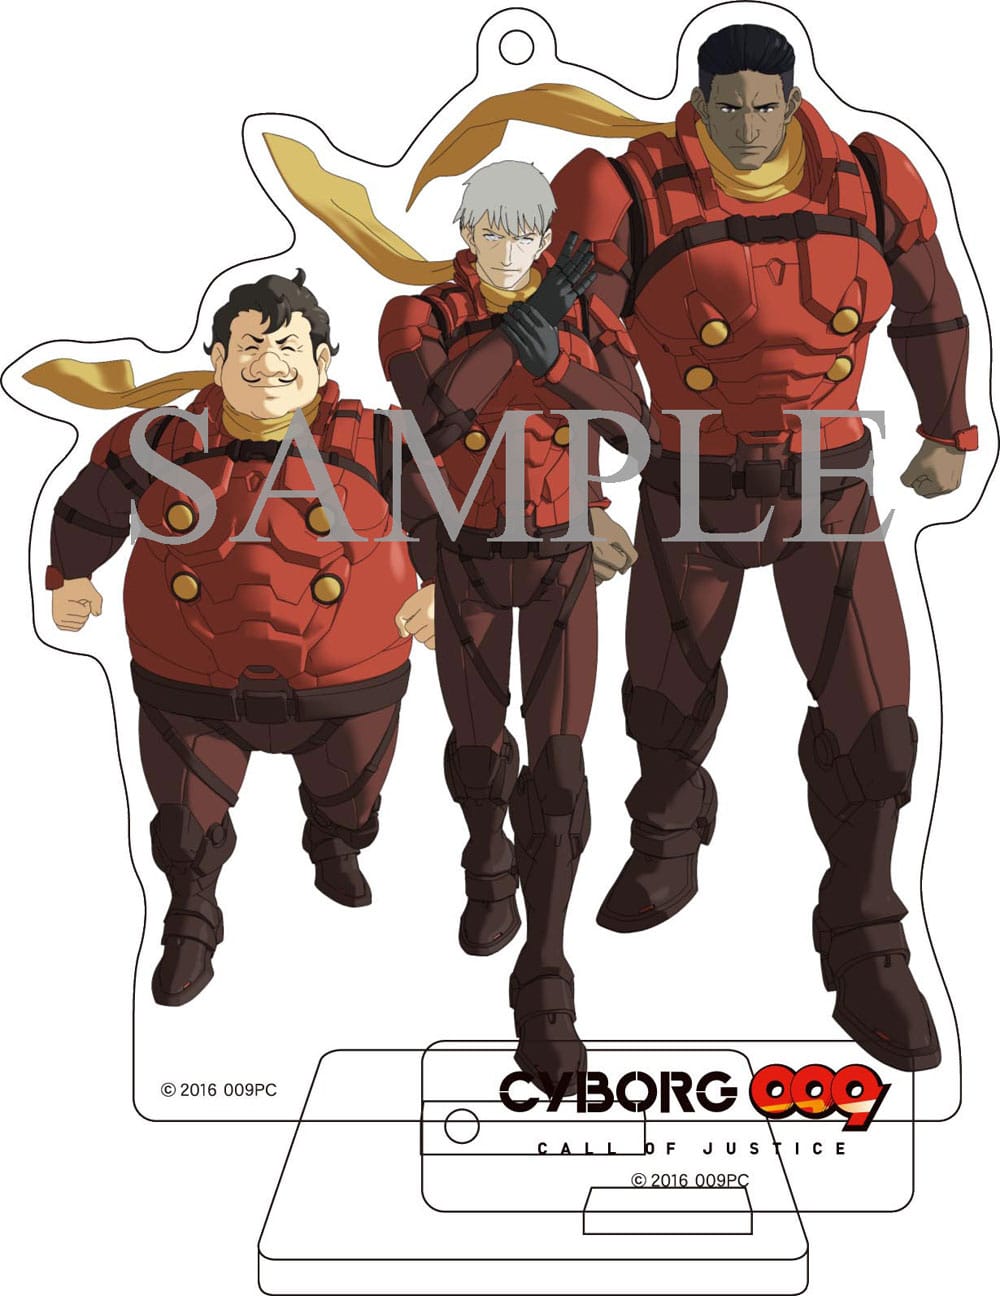 CYBORG009 CALL OF JUSTICE Vol.1〜3 全3巻 [Blu-rayセット